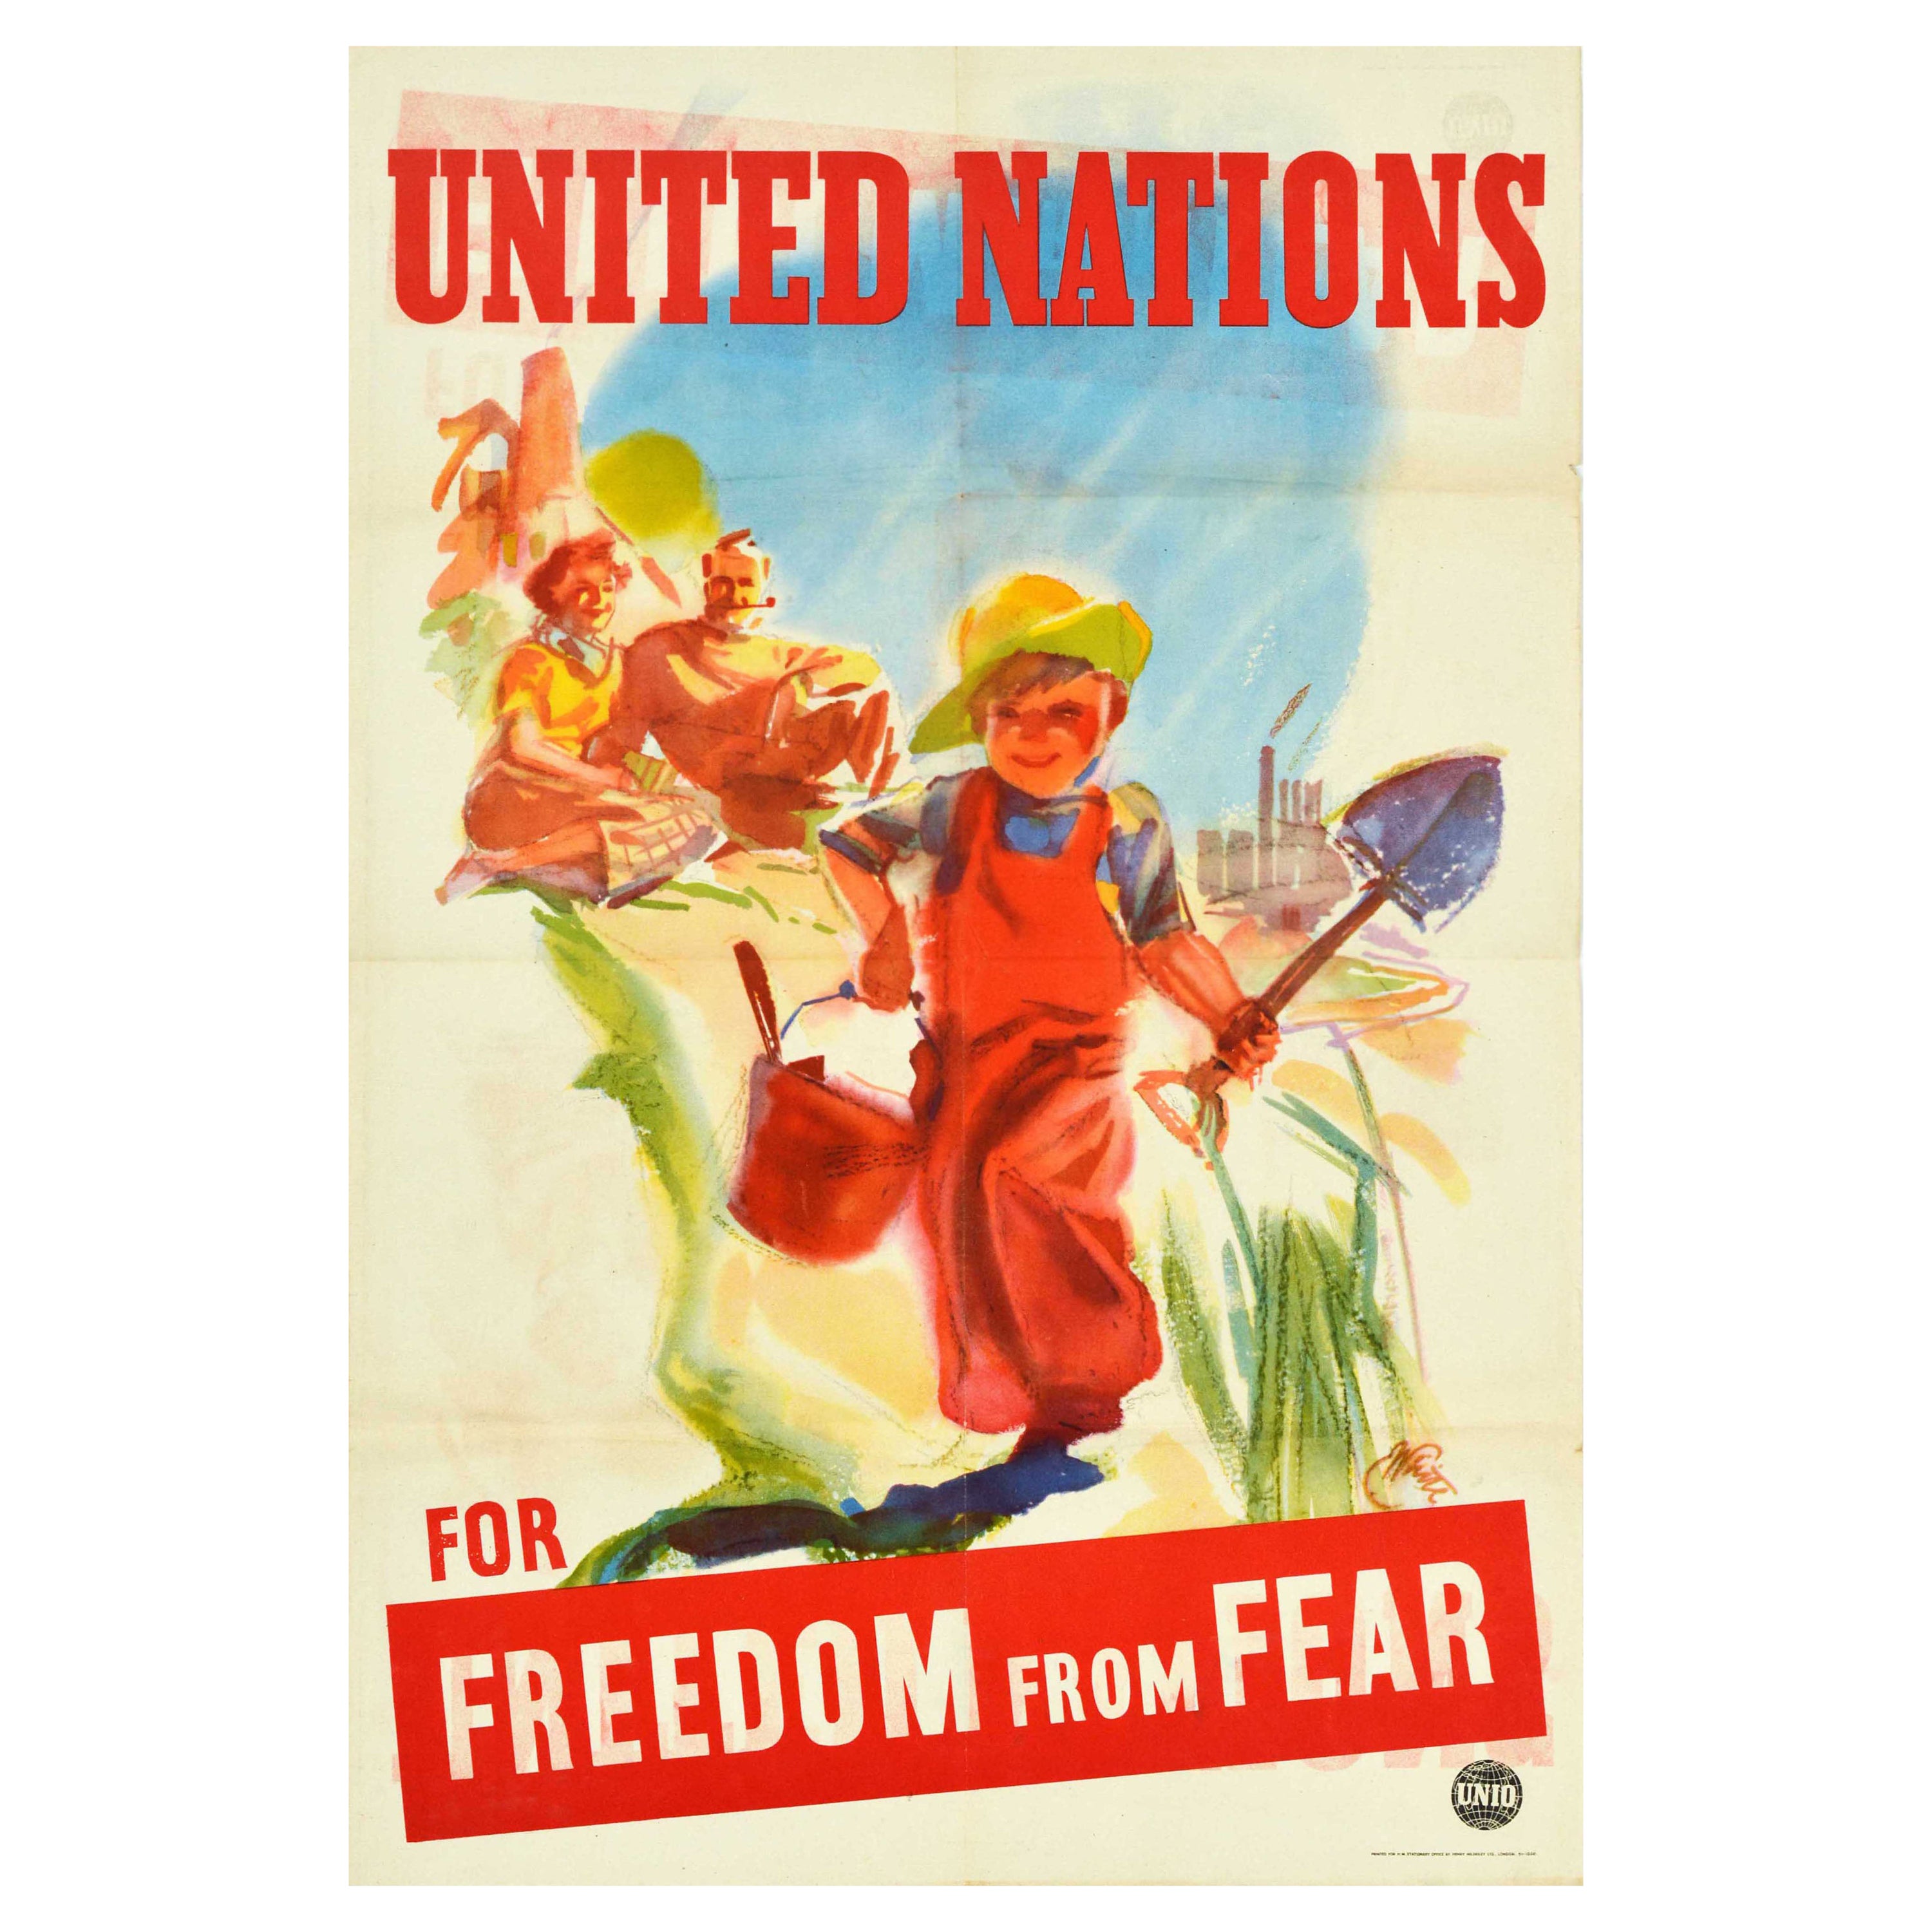 Original Vintage Poster United Nations For Freedom From Fear Seaside Beach Art